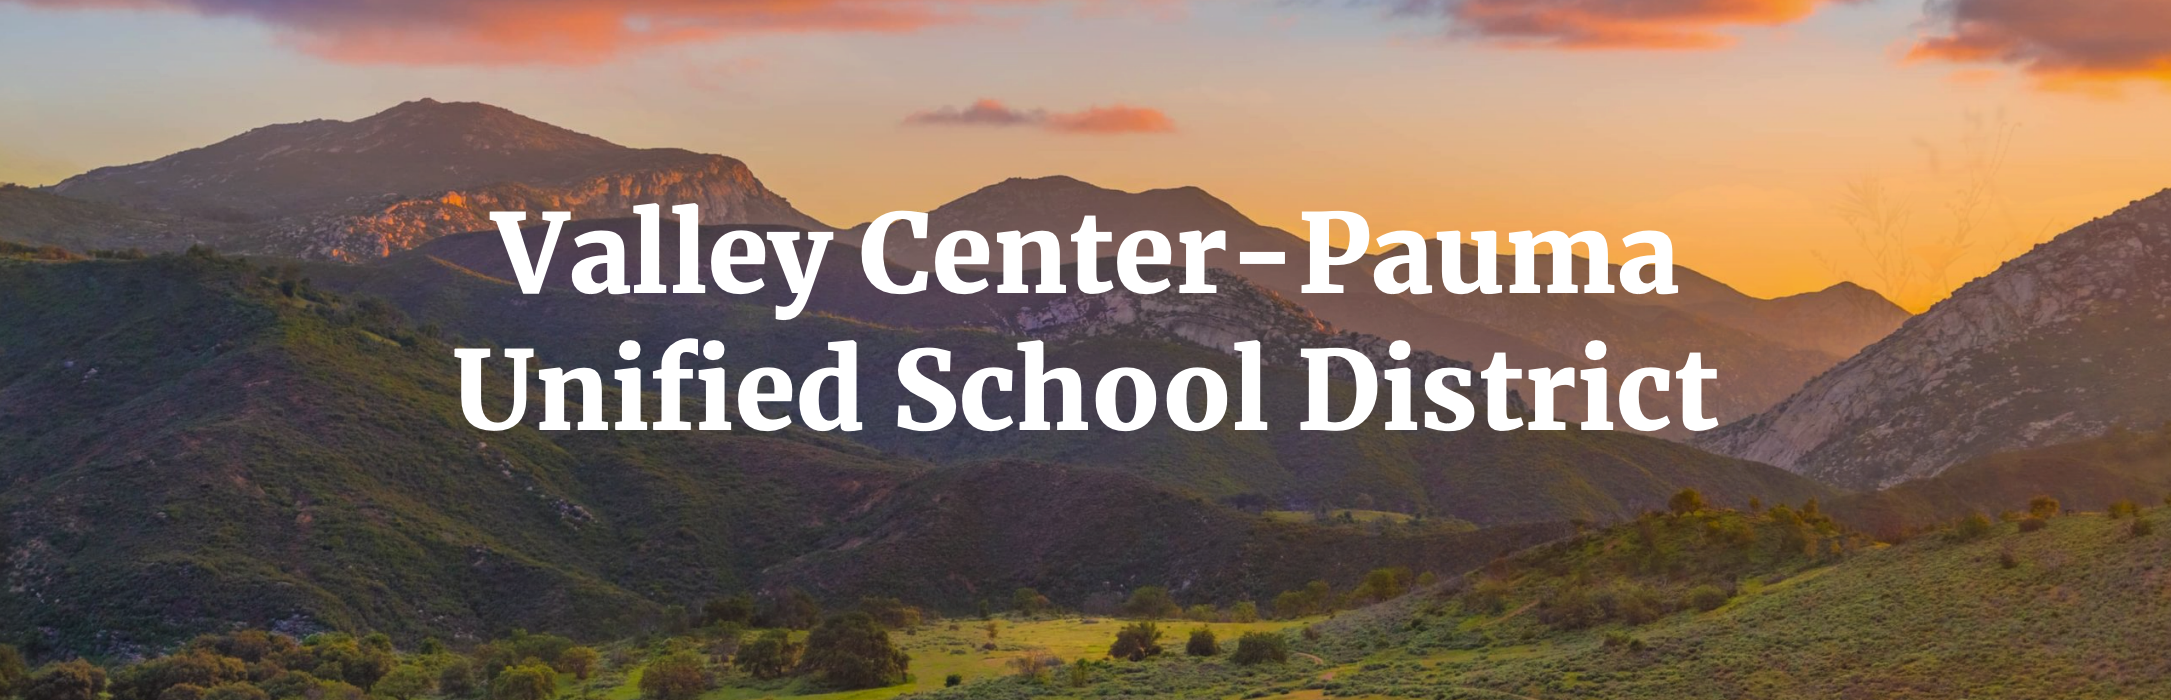 valley center pauma unified school district overlayed on picture of a sunset in a valley 